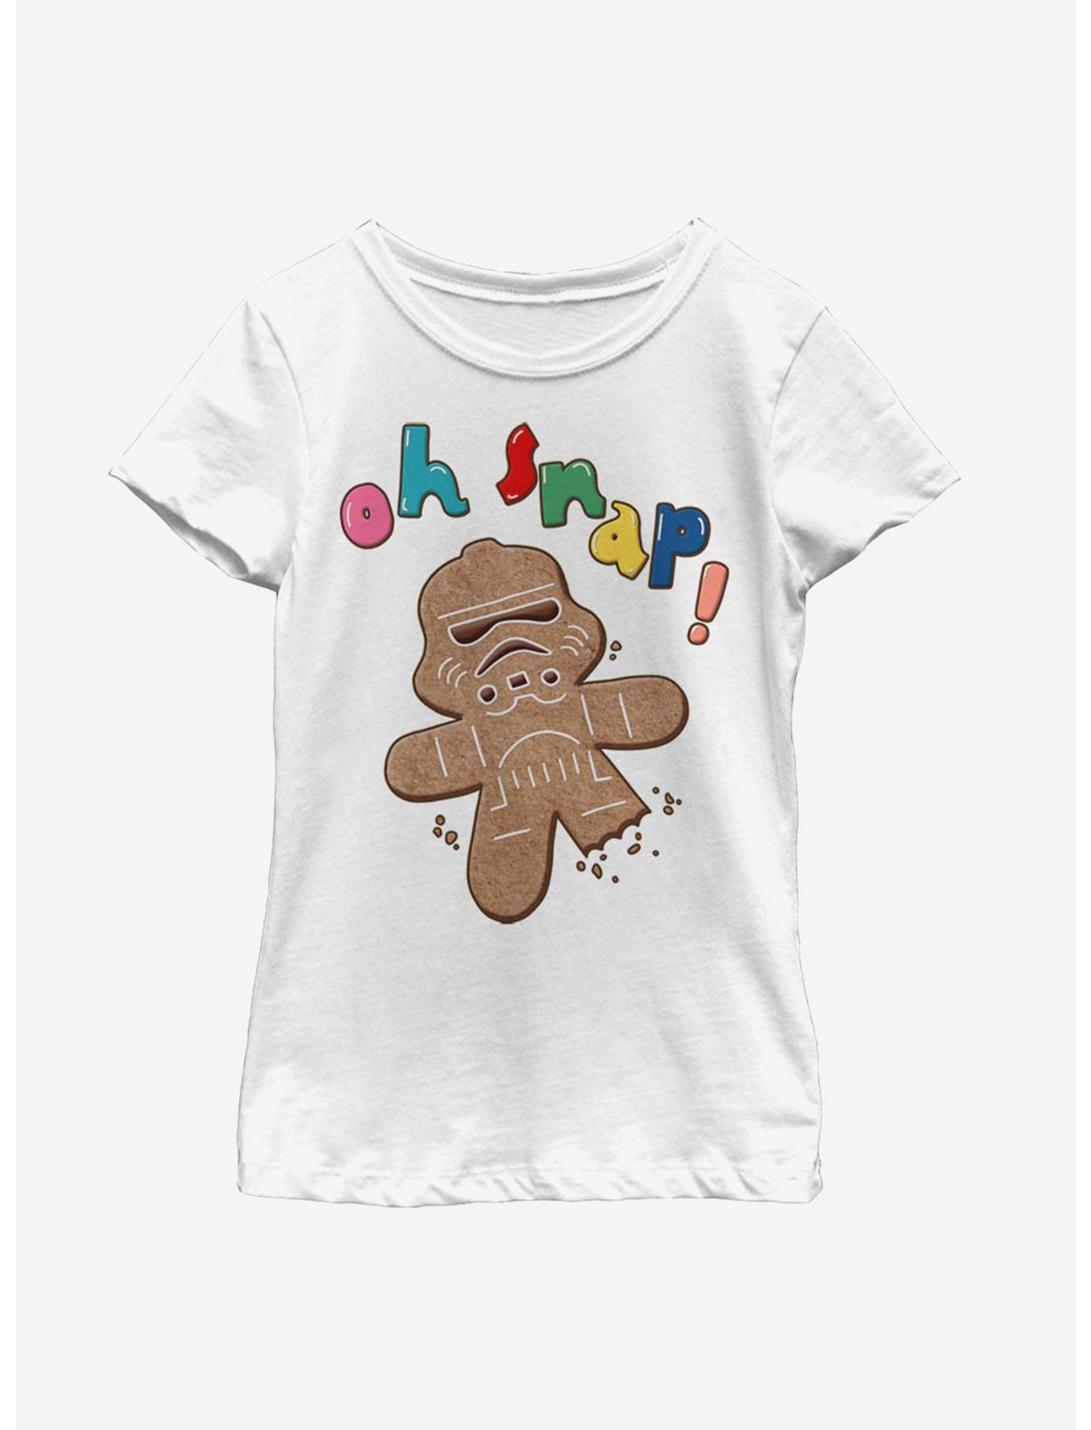 Star Wars Storm Trooper Gingerbread Youth Girls T-Shirt, WHITE, hi-res